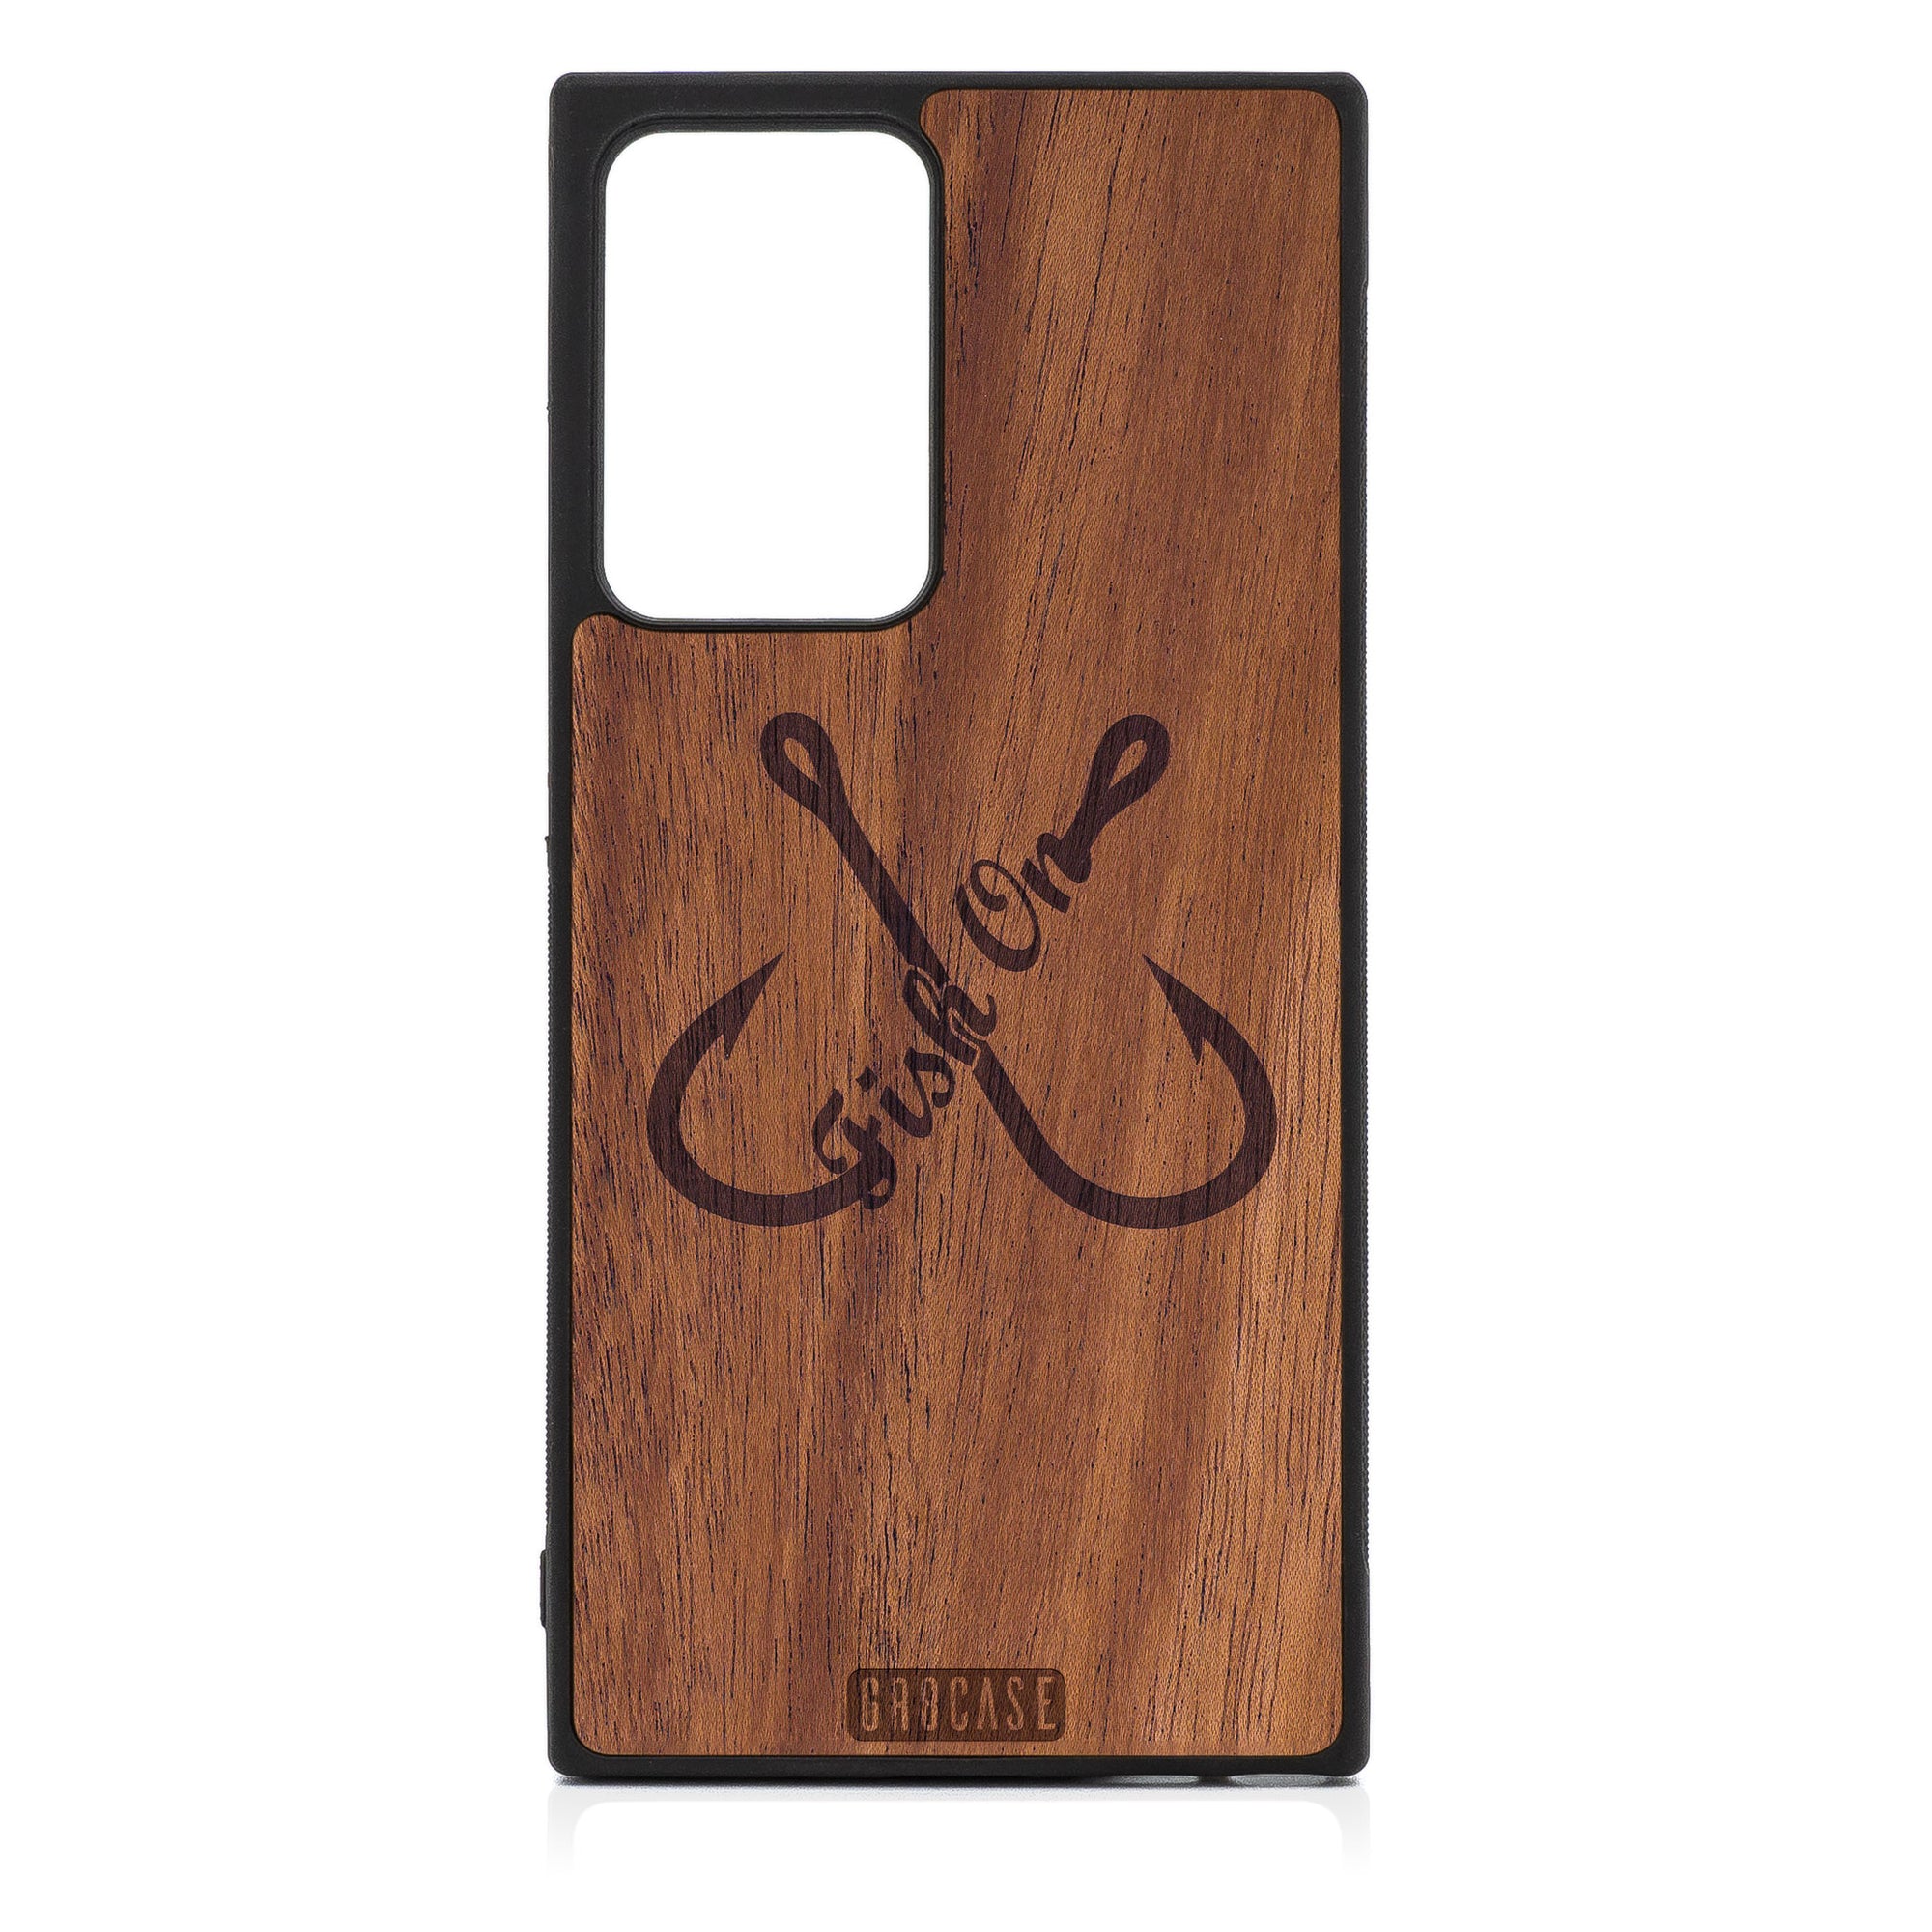 Fish On (Fish Hooks) Design Wood Case For Samsung Galaxy Note 20 Ultra